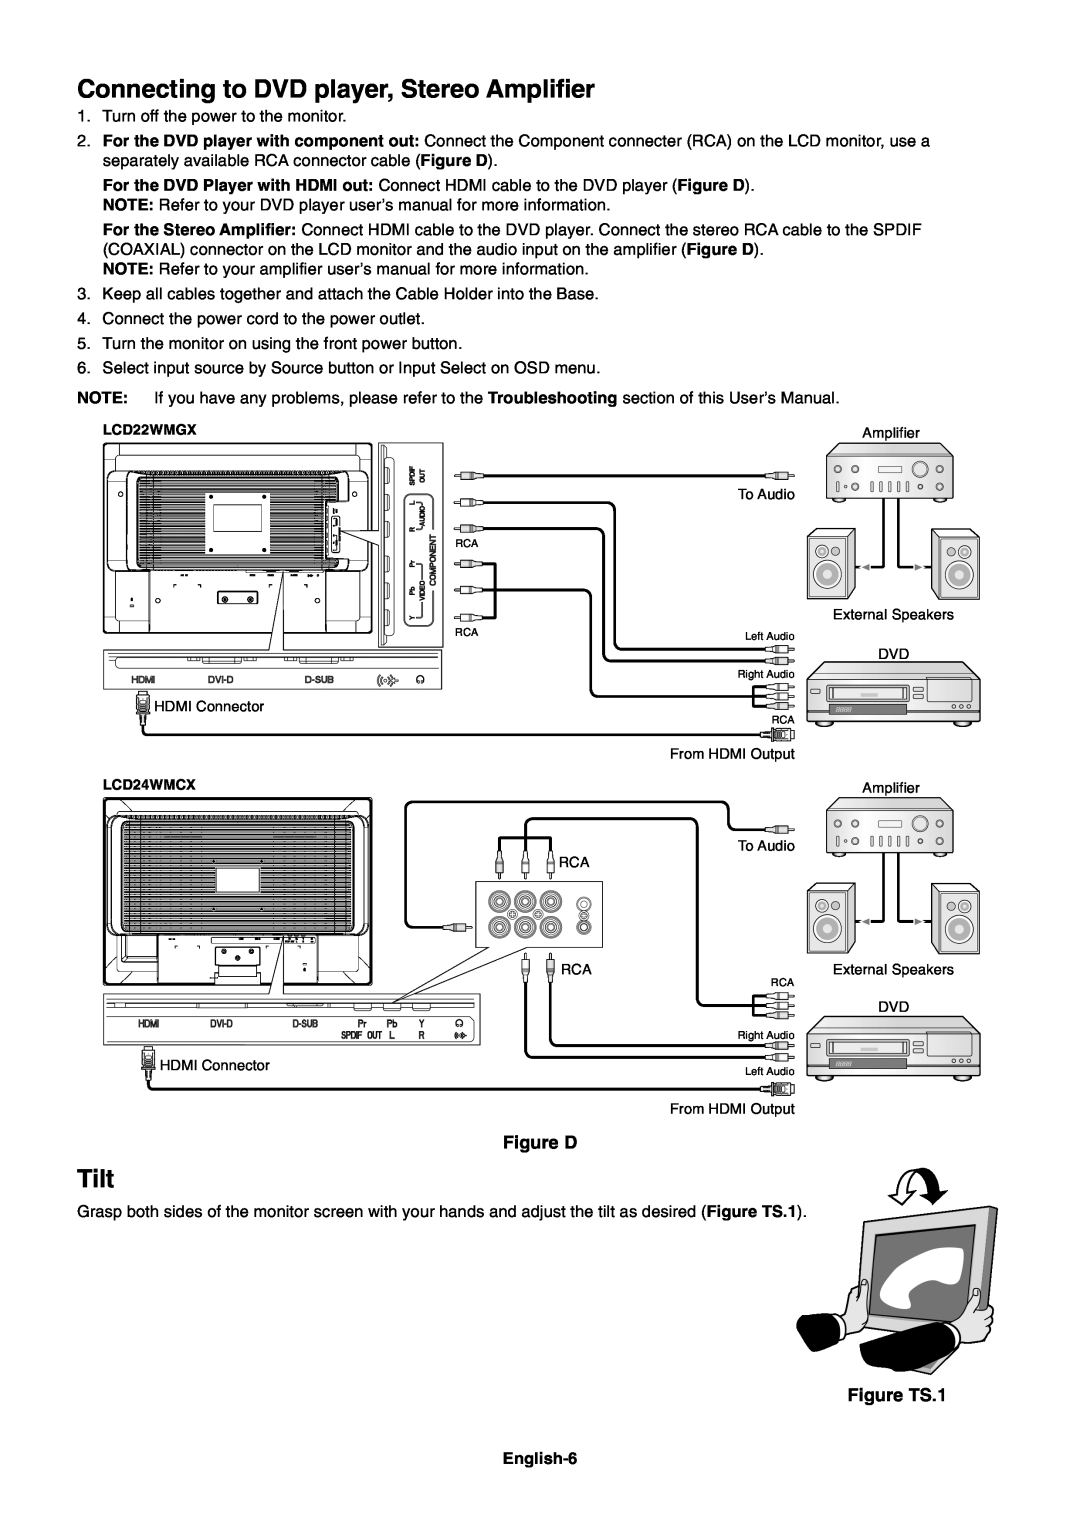 NEC LCD22WMGX user manual Connecting to DVD player, Stereo Amplifier, Tilt, Figure D, Figure TS.1 